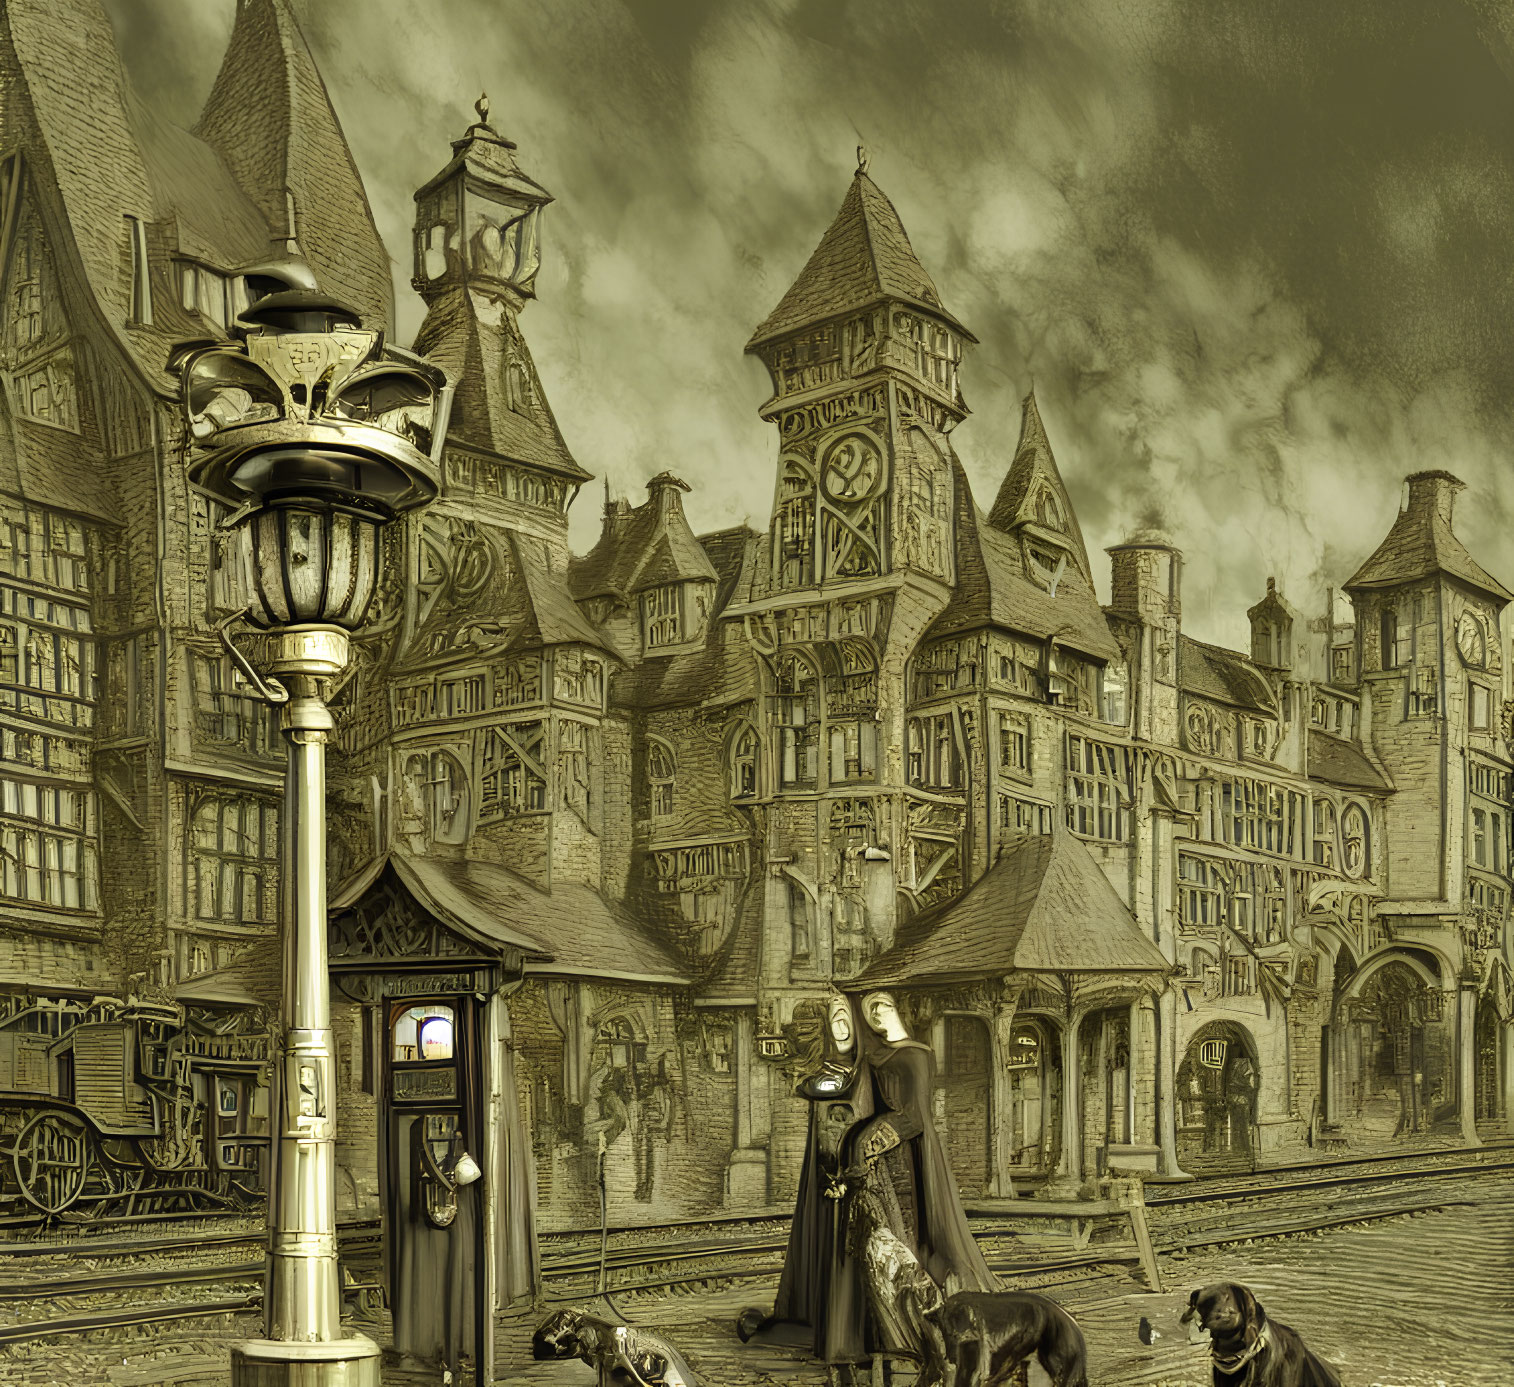 Mysterious cloaked figure with dogs in gothic cityscape